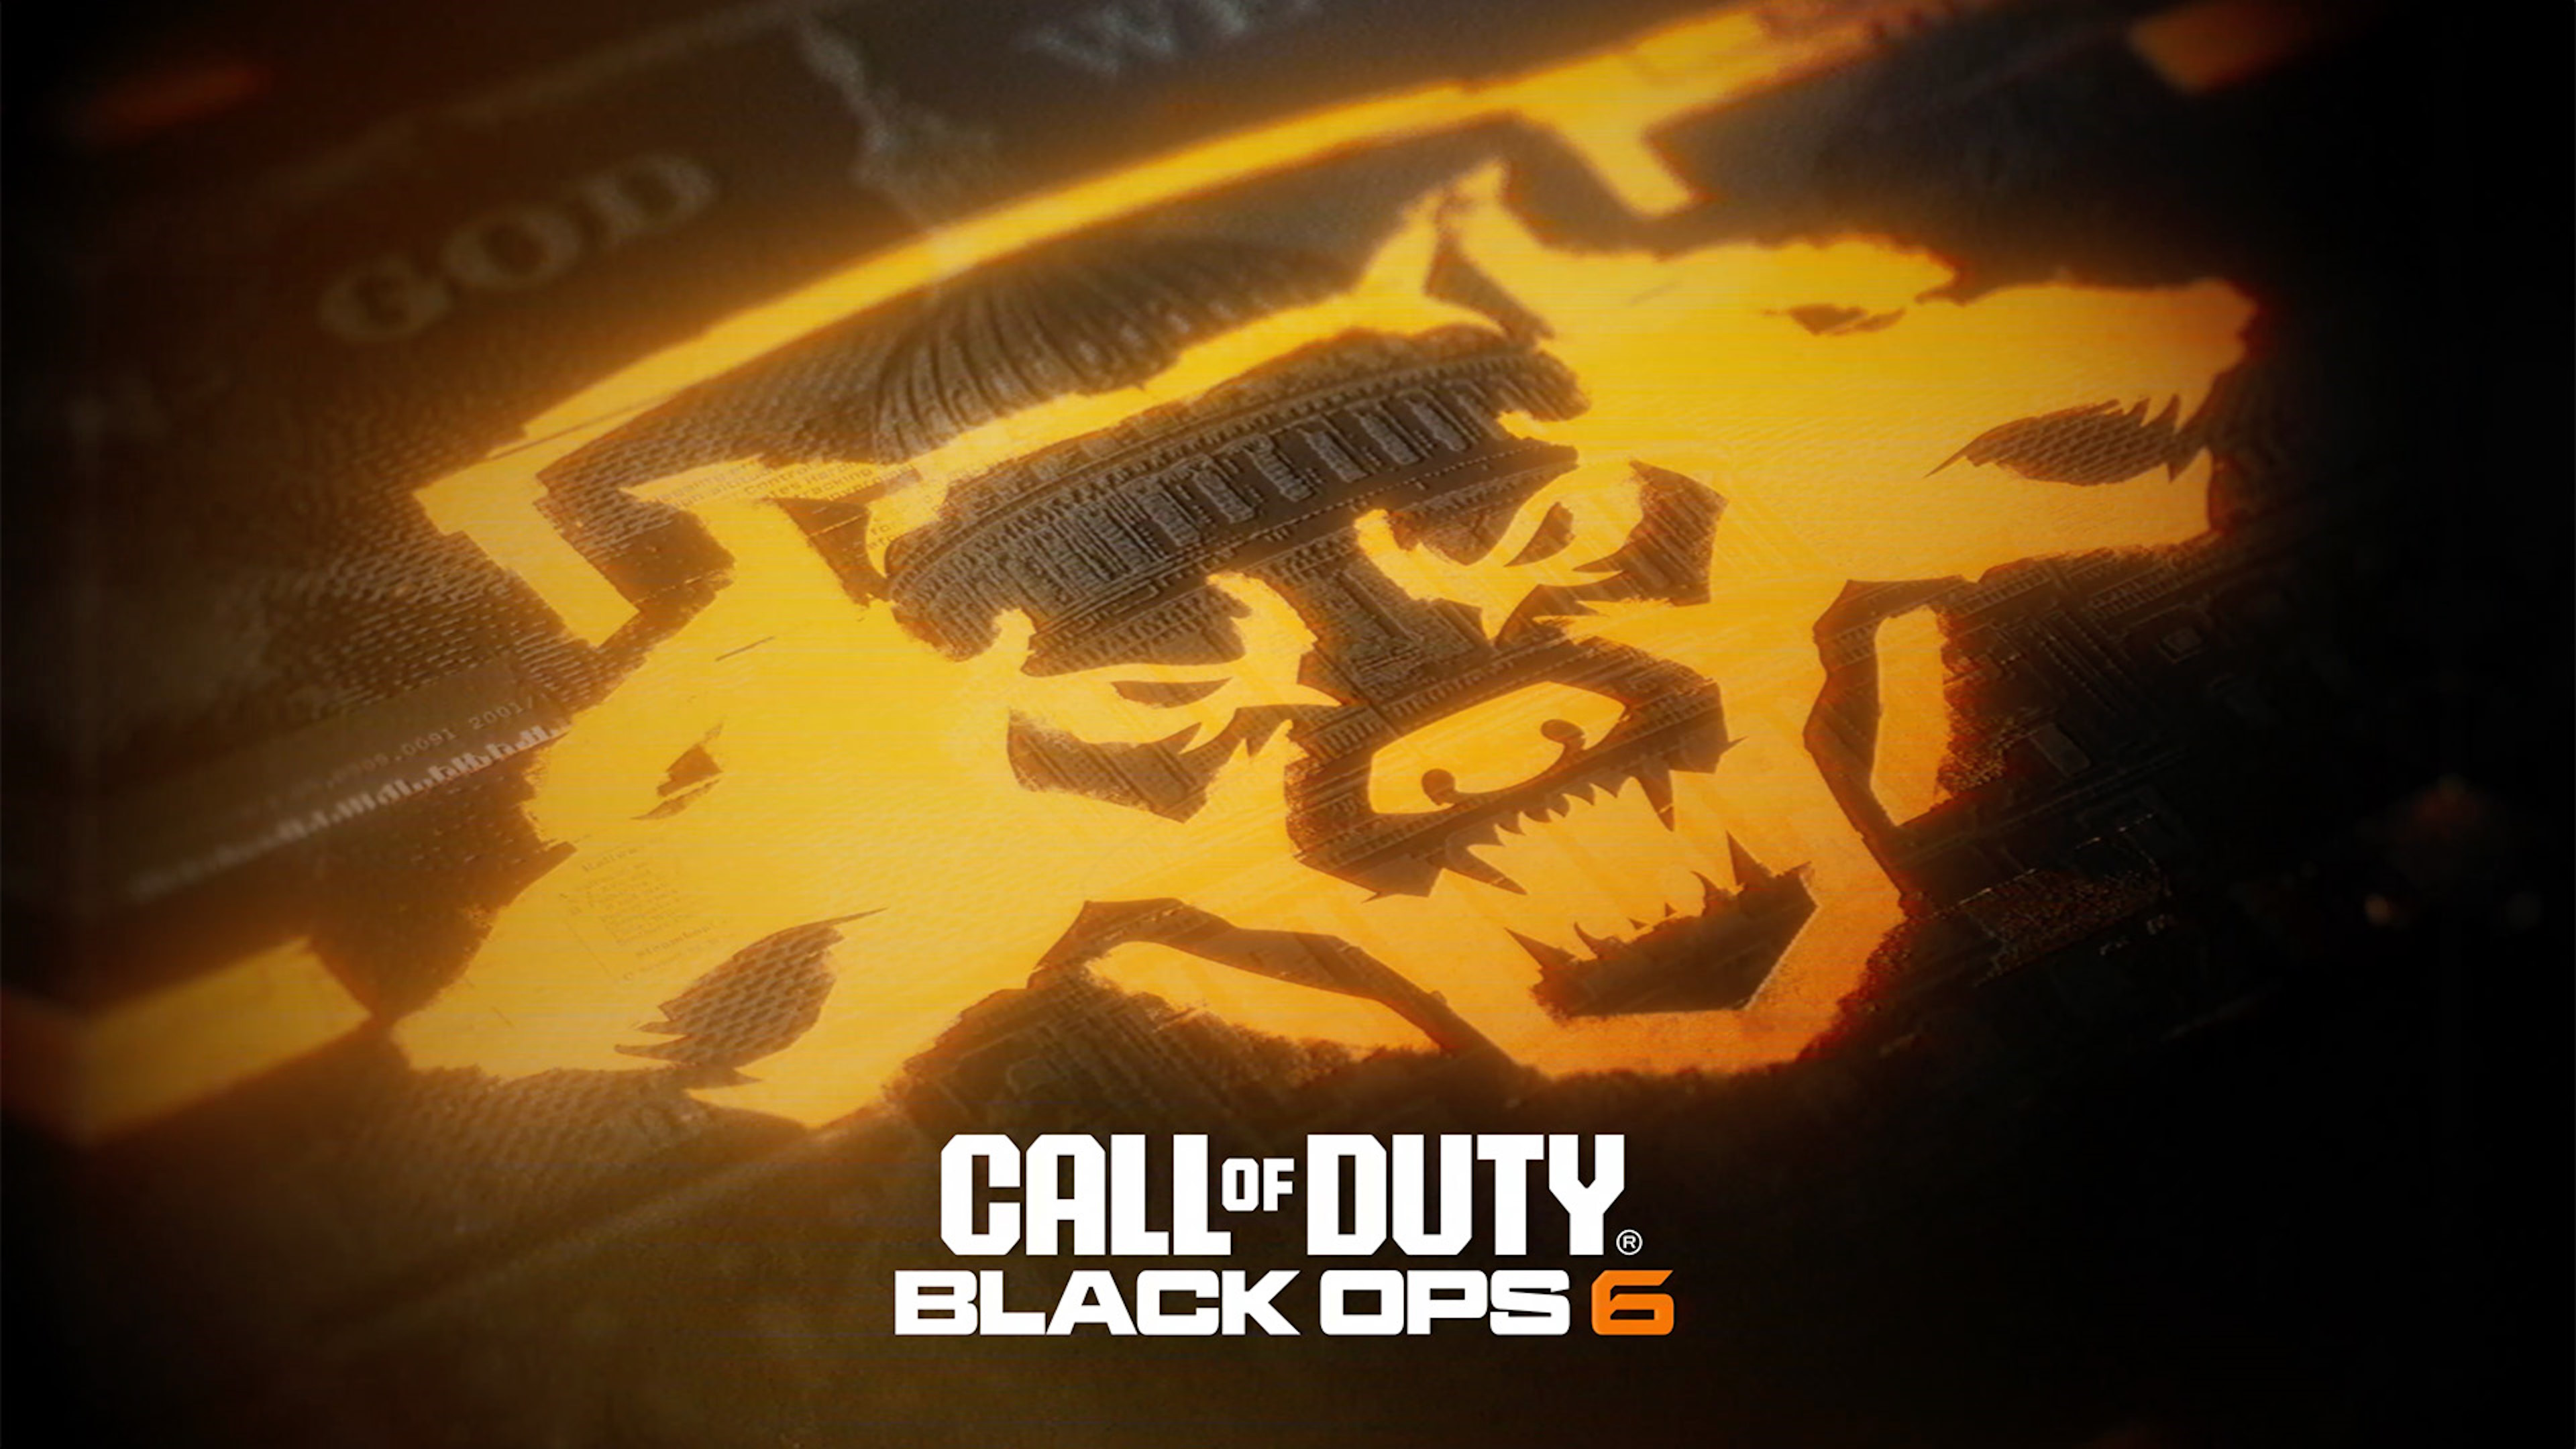 The logo for Call of Duty: Black Ops 6.